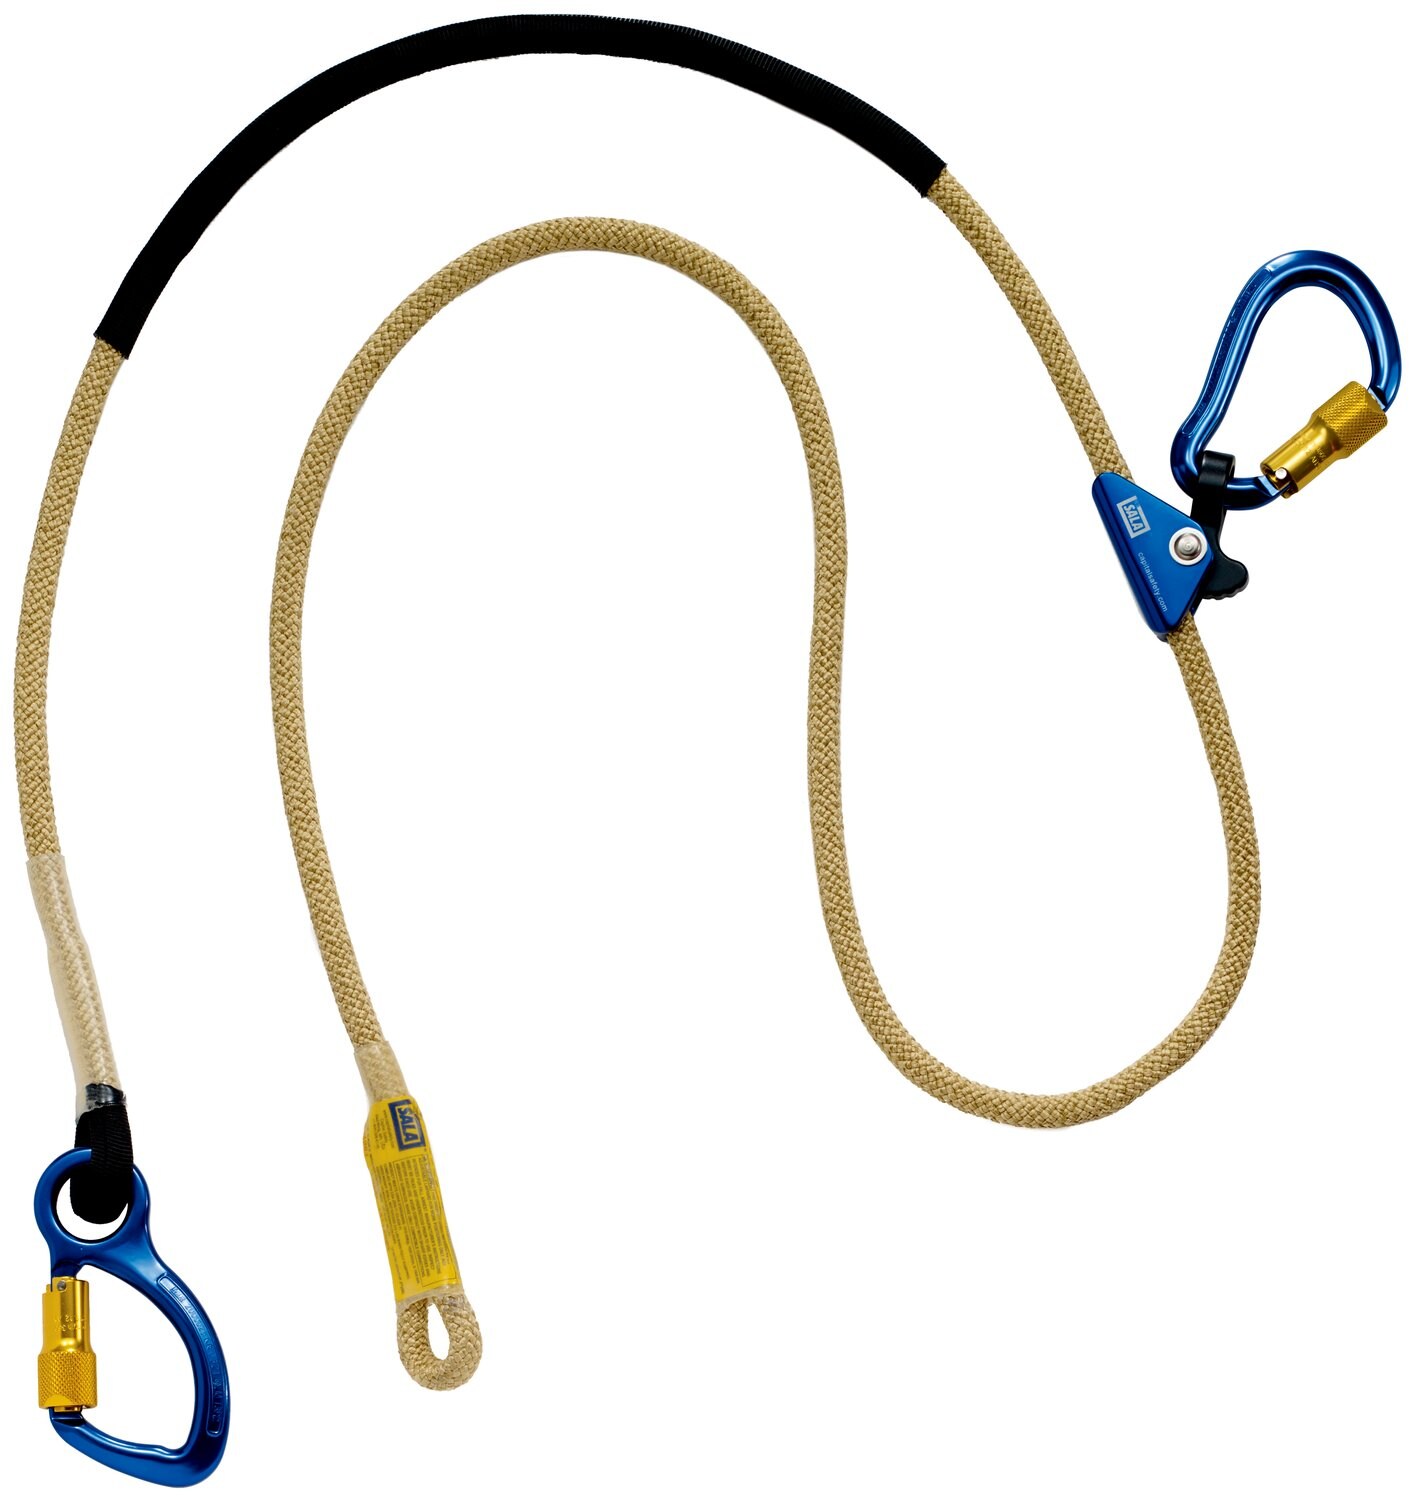 7100239629 - 3M DBI-SALA Pole Climber's Adjustable Rope Positioning Lanyard for Electrical/Hot Work Use 1234083, 8 ft